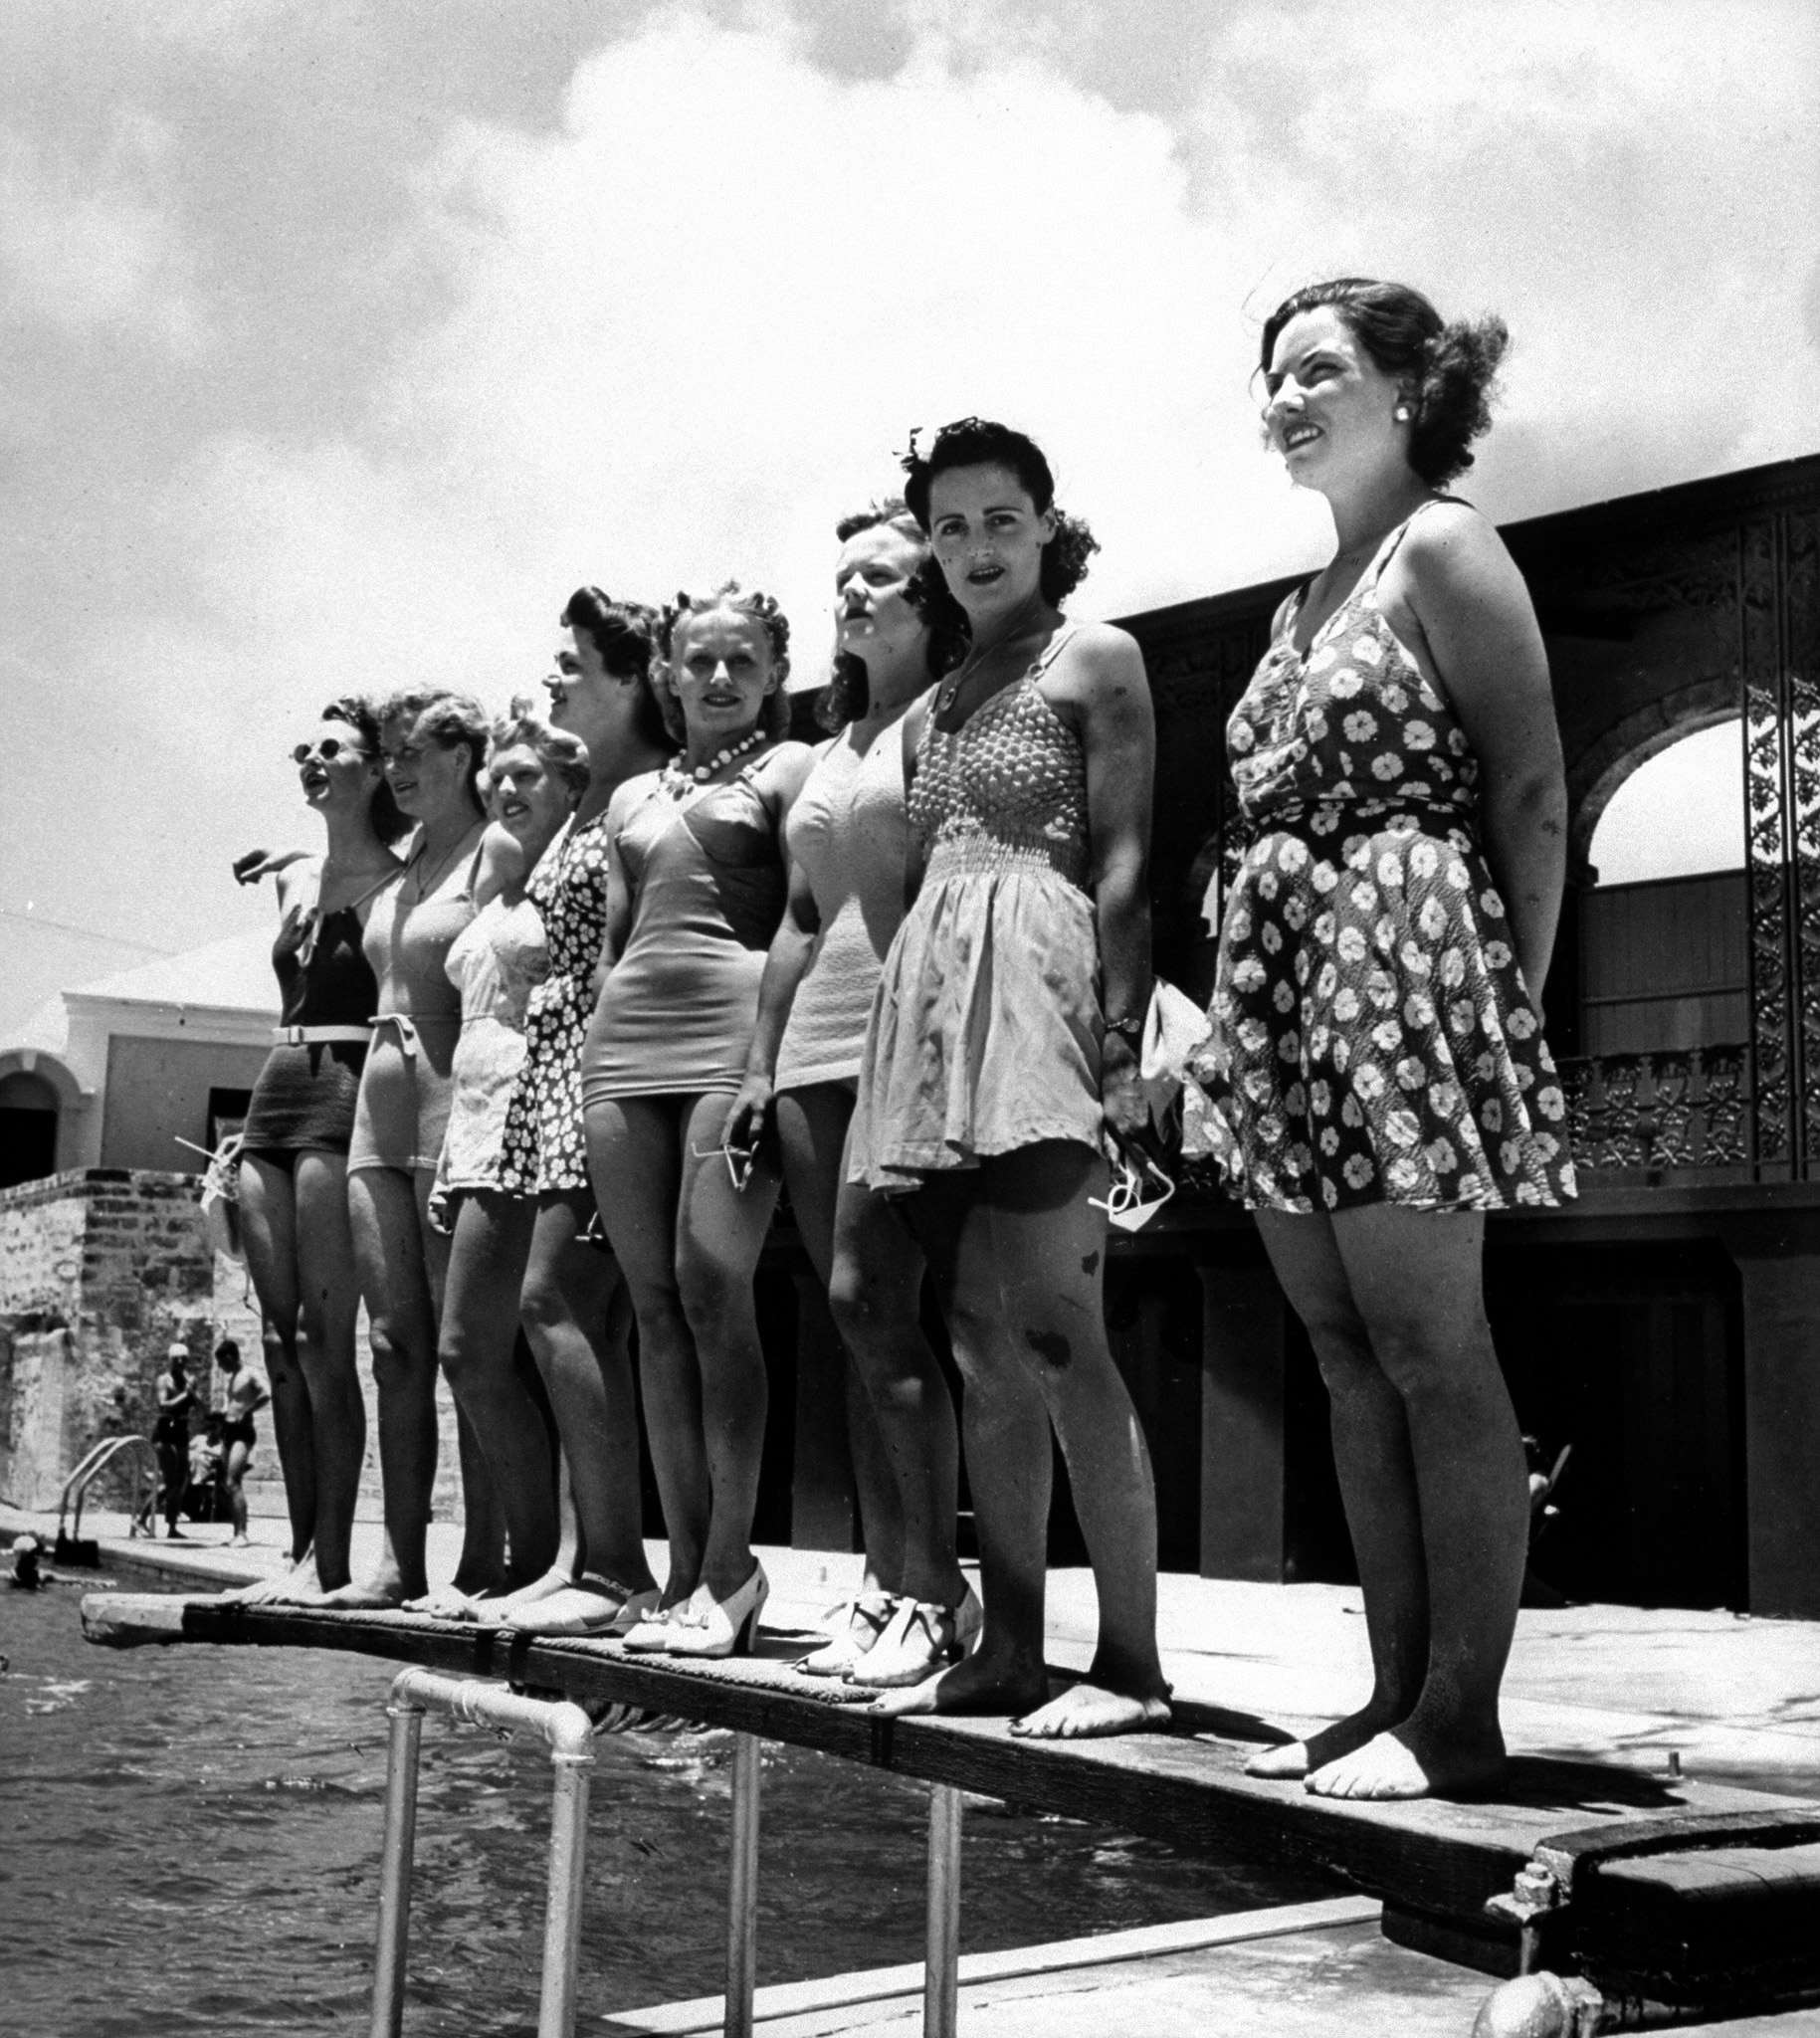 Bathing suit clad female members of the British Imperial Censorship Staff, who call themseleves the censorettes, standing poolside at the Princess Hotel, which also serves as their offices on the island. Circa 1941.